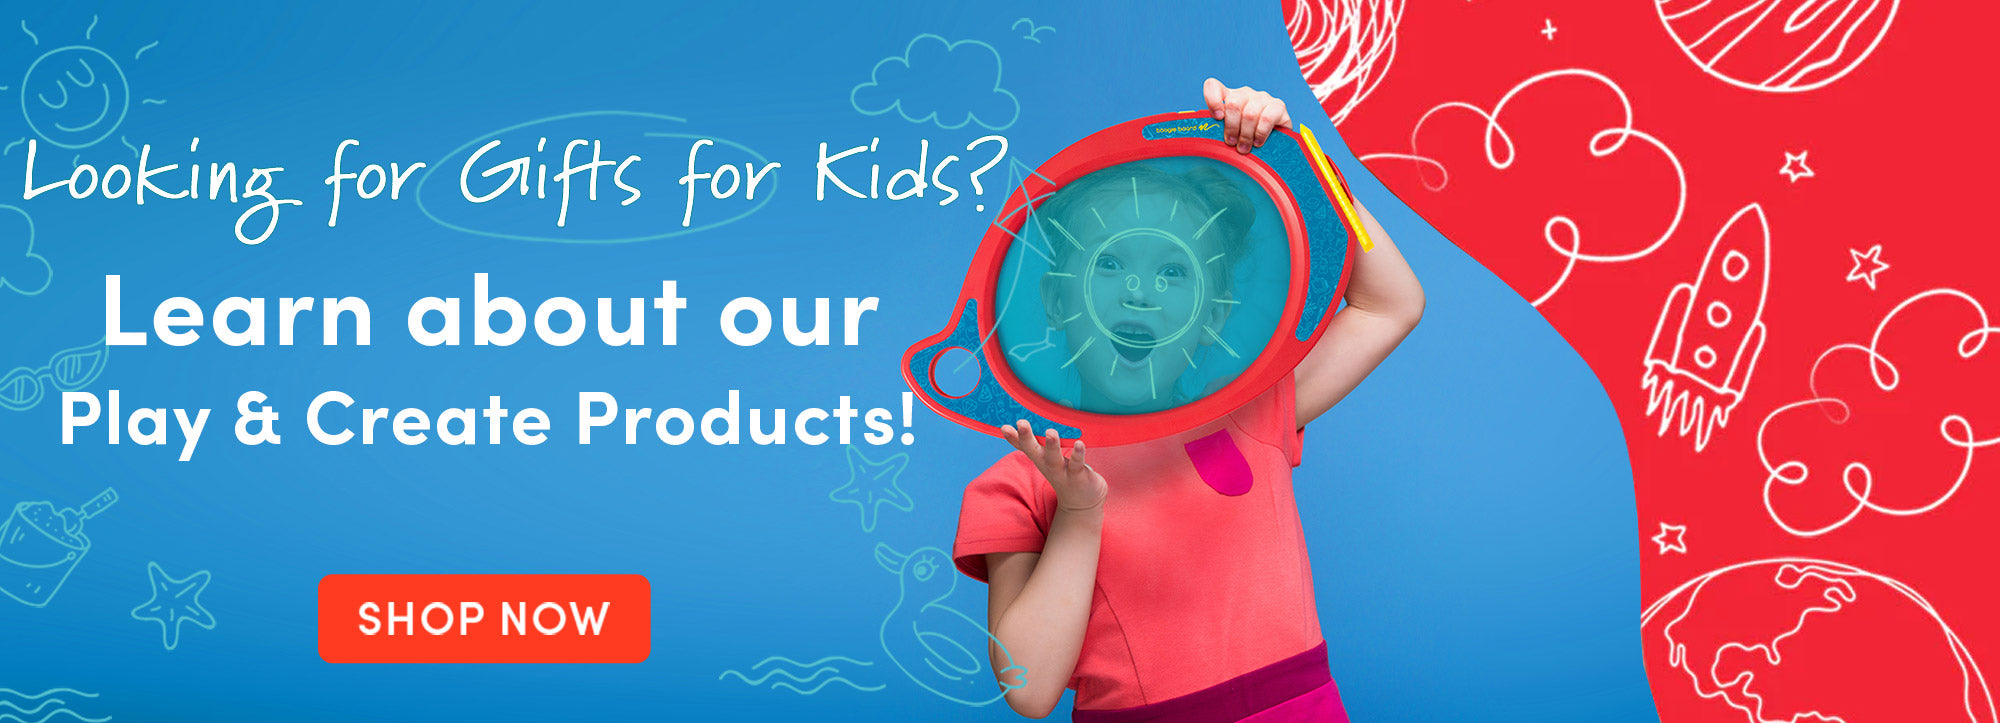 Looking for Gifts for Kids? Learn about our Play & Create products